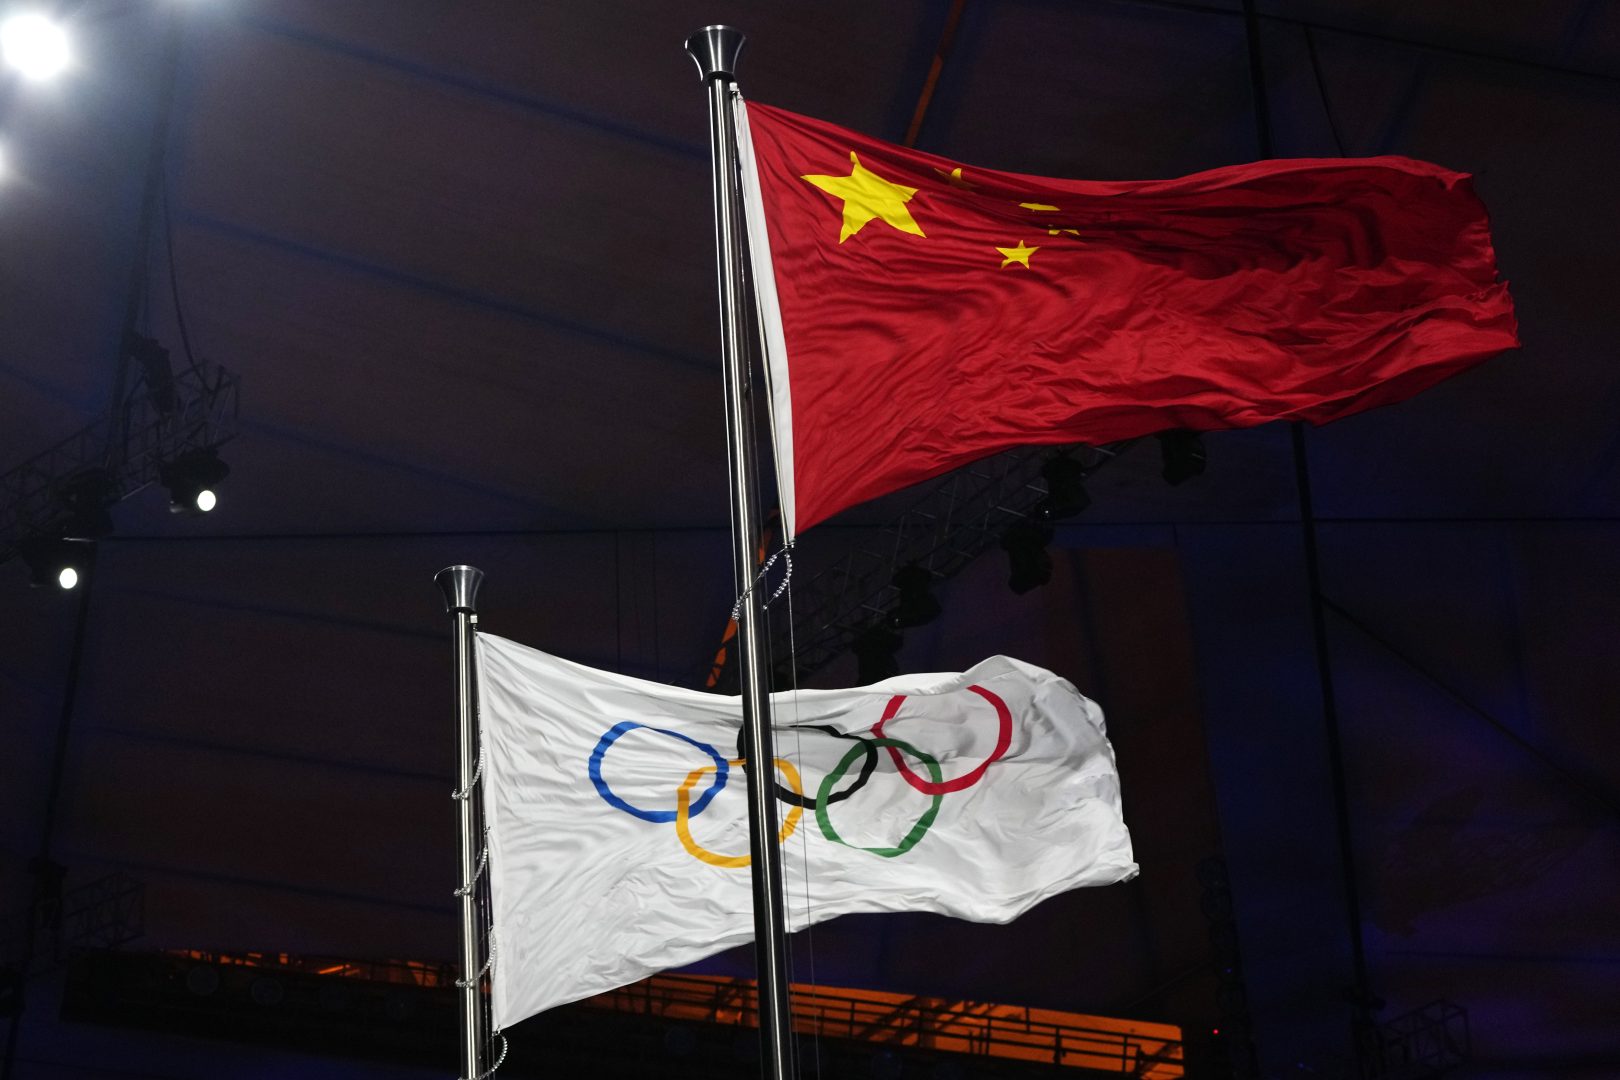 The Chinese and Olympic flags fly during the opening ceremony of the 2022 Winter Olympics, Friday, Feb. 4, 2022, in Beijing. (AP Photo/Natacha Pisarenko)